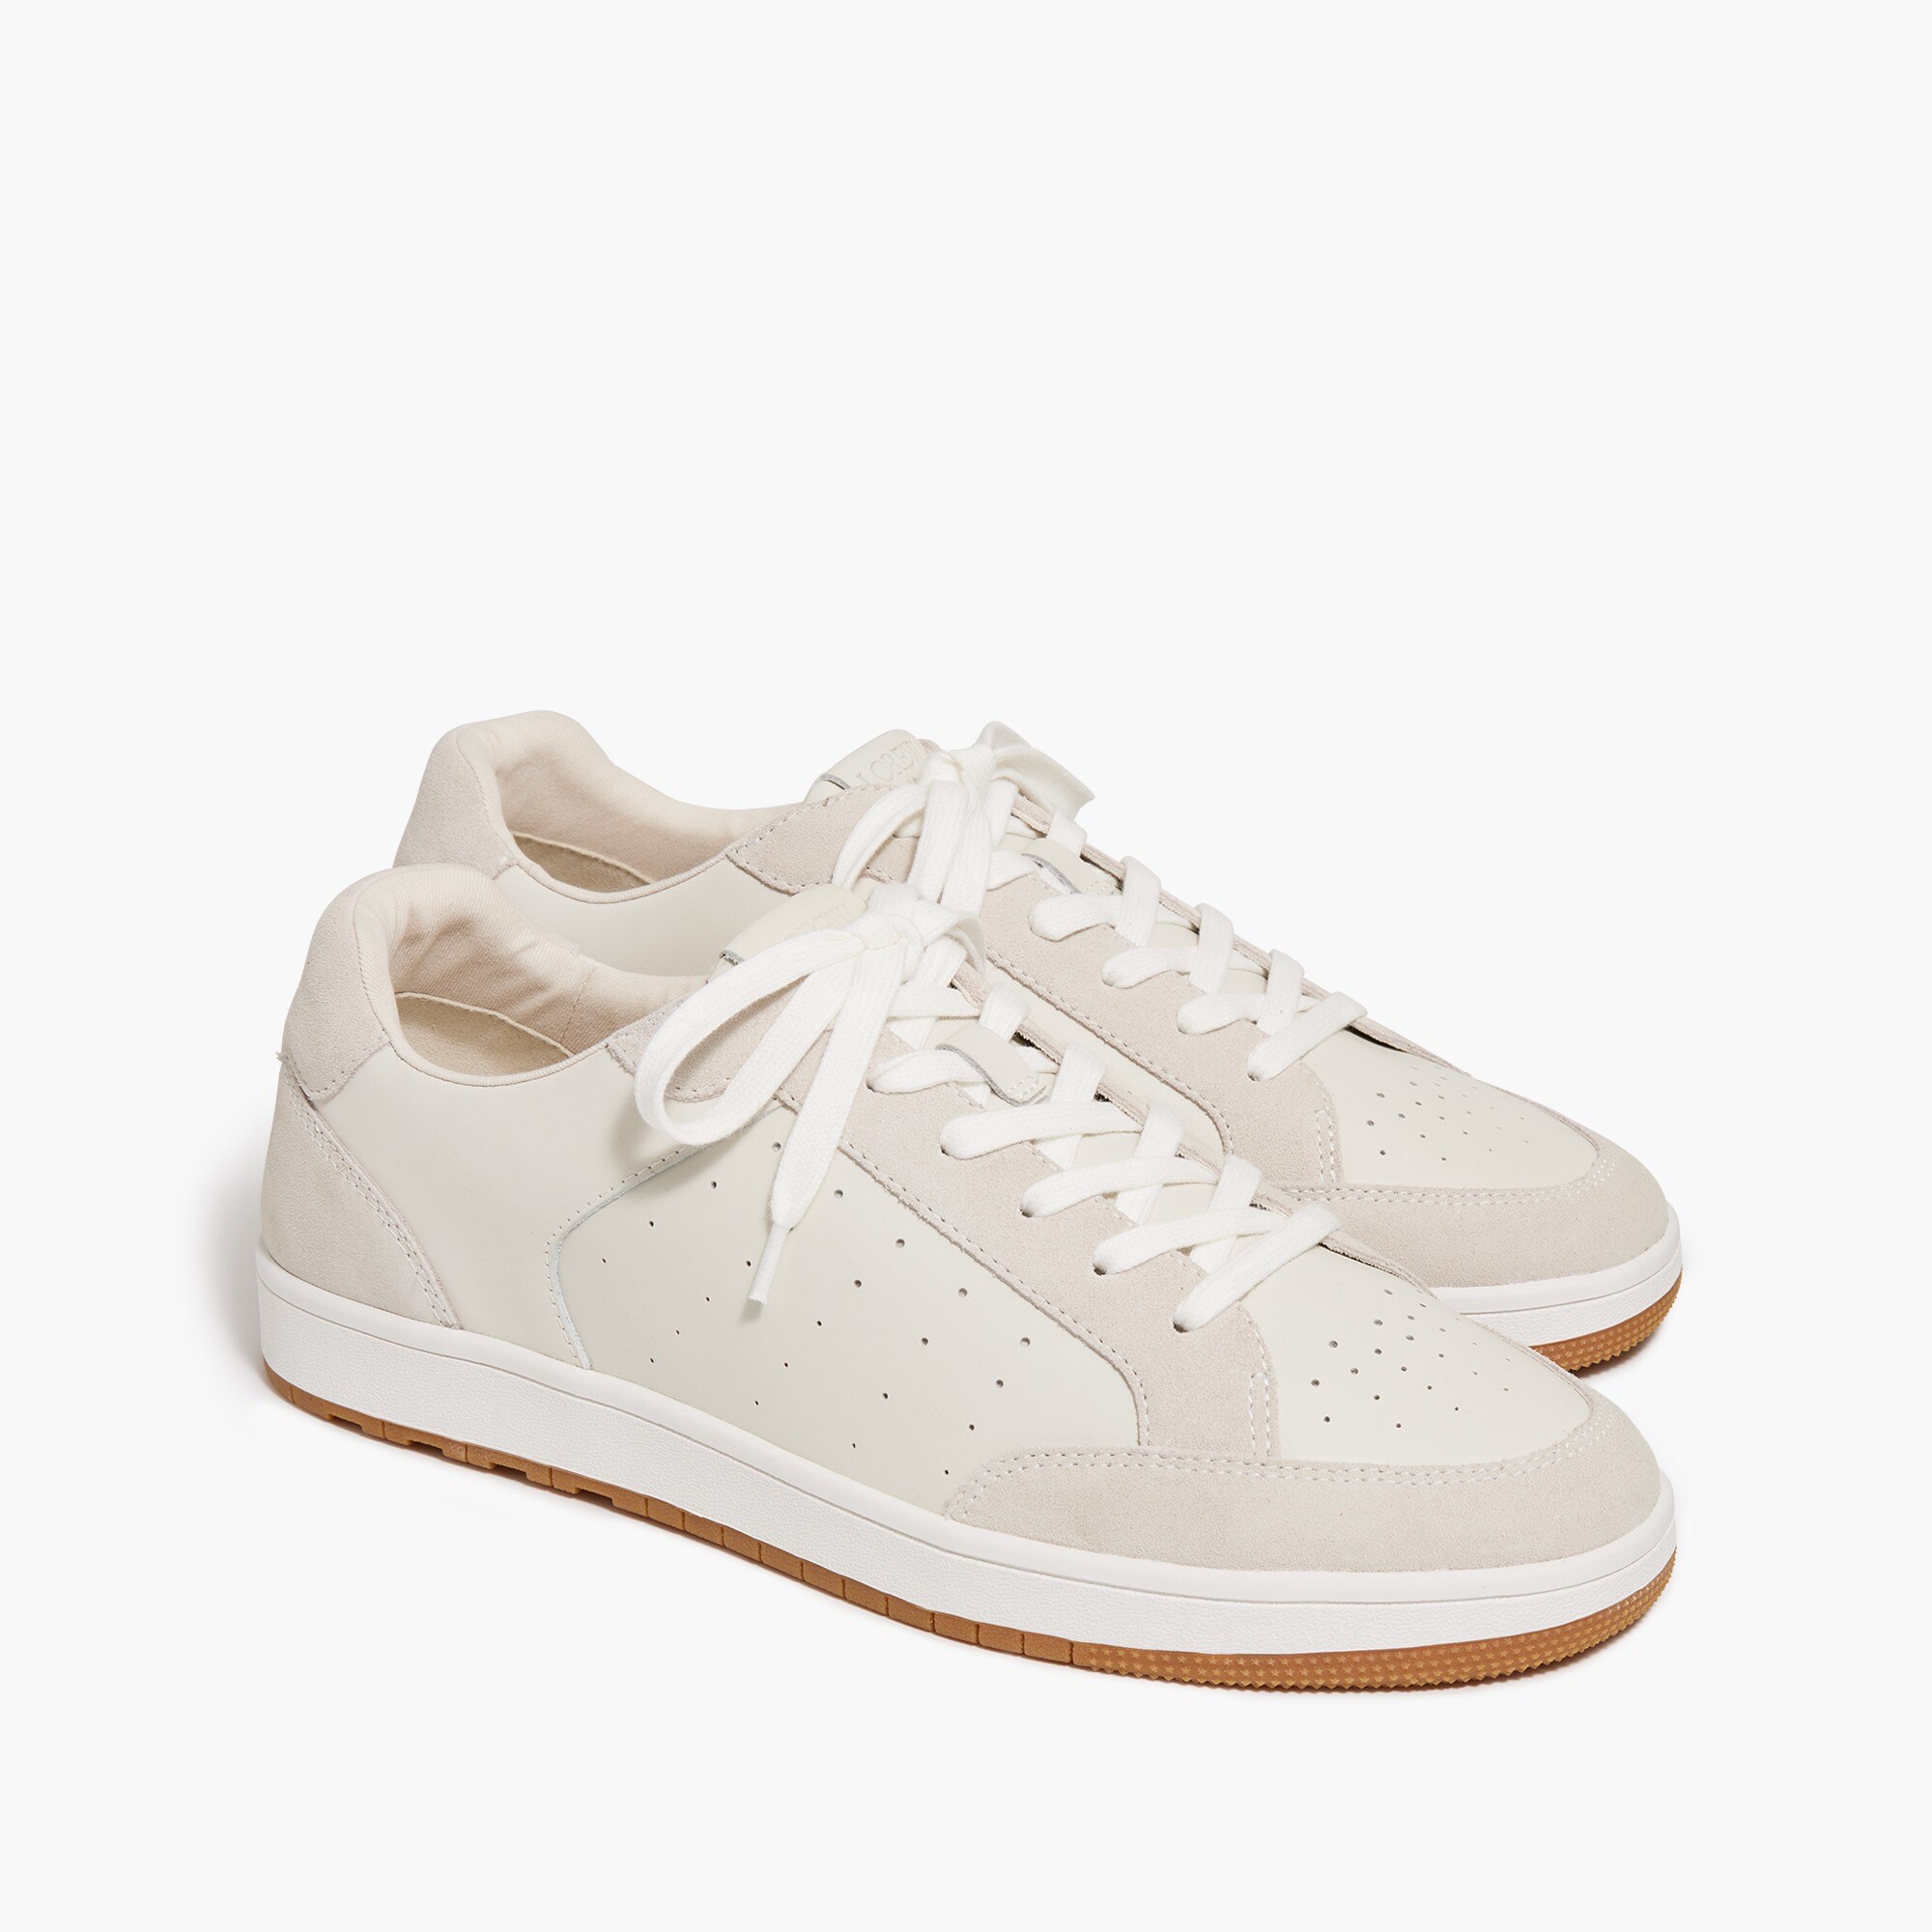 mens Court sneakers